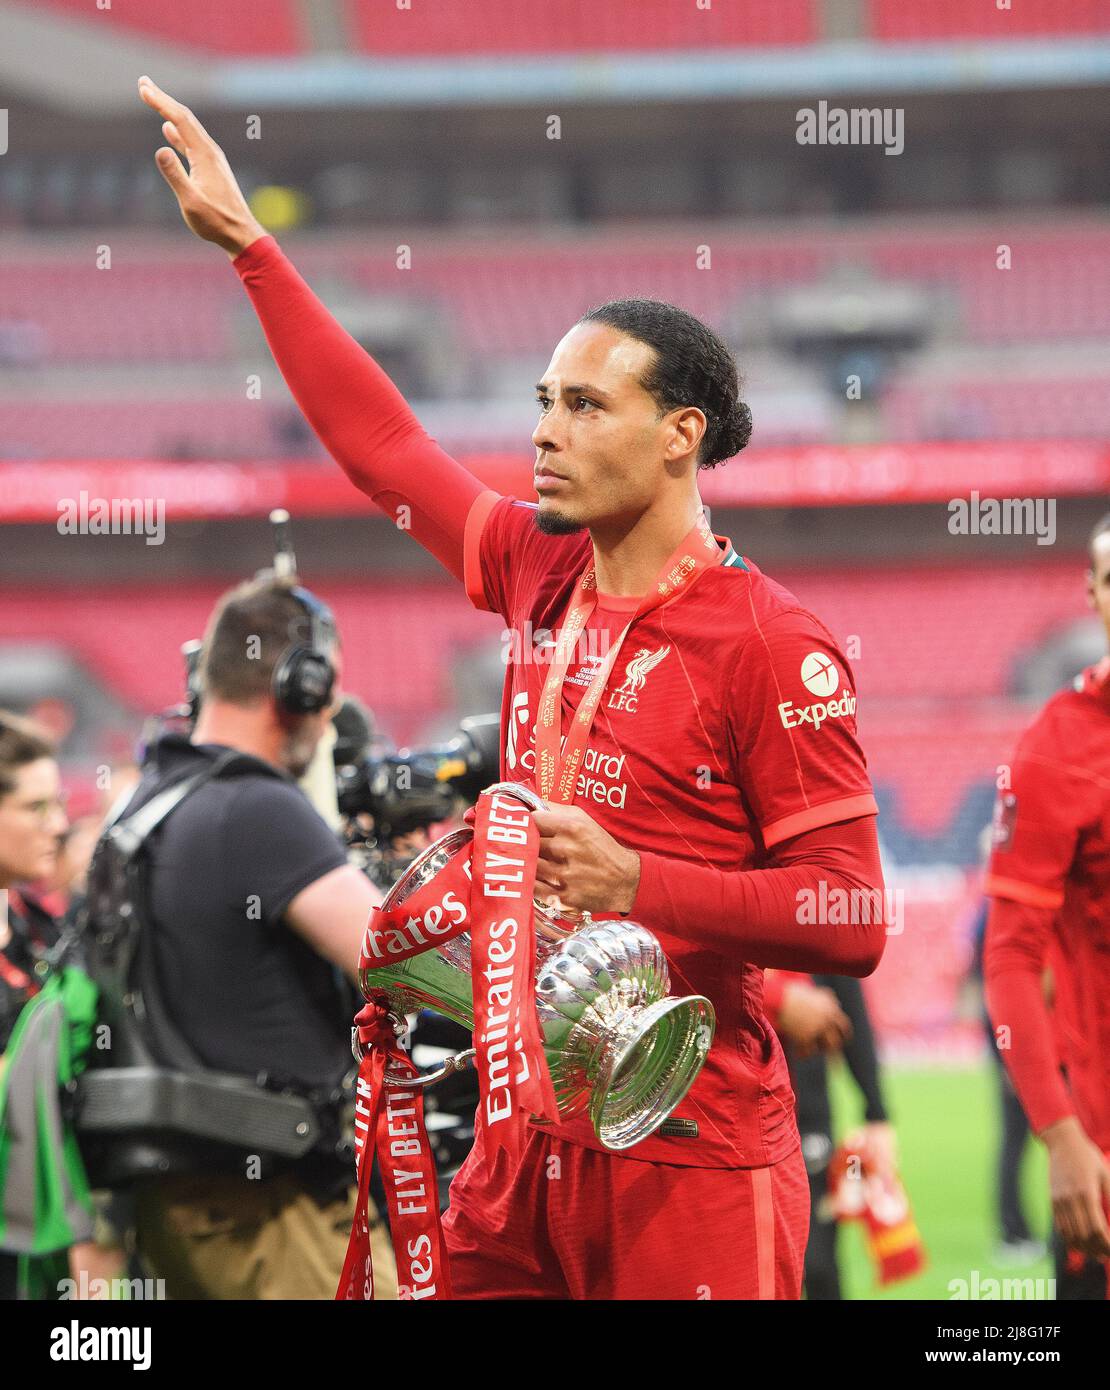 14 May 2022 - Chelsea v Liverpool - Emirates FA Cup Final - Wembley Stadium  Virgin Van Dijk celebrates with the FA Cup  Picture Credit : © Mark Pain / Alamy Live News Stock Photo